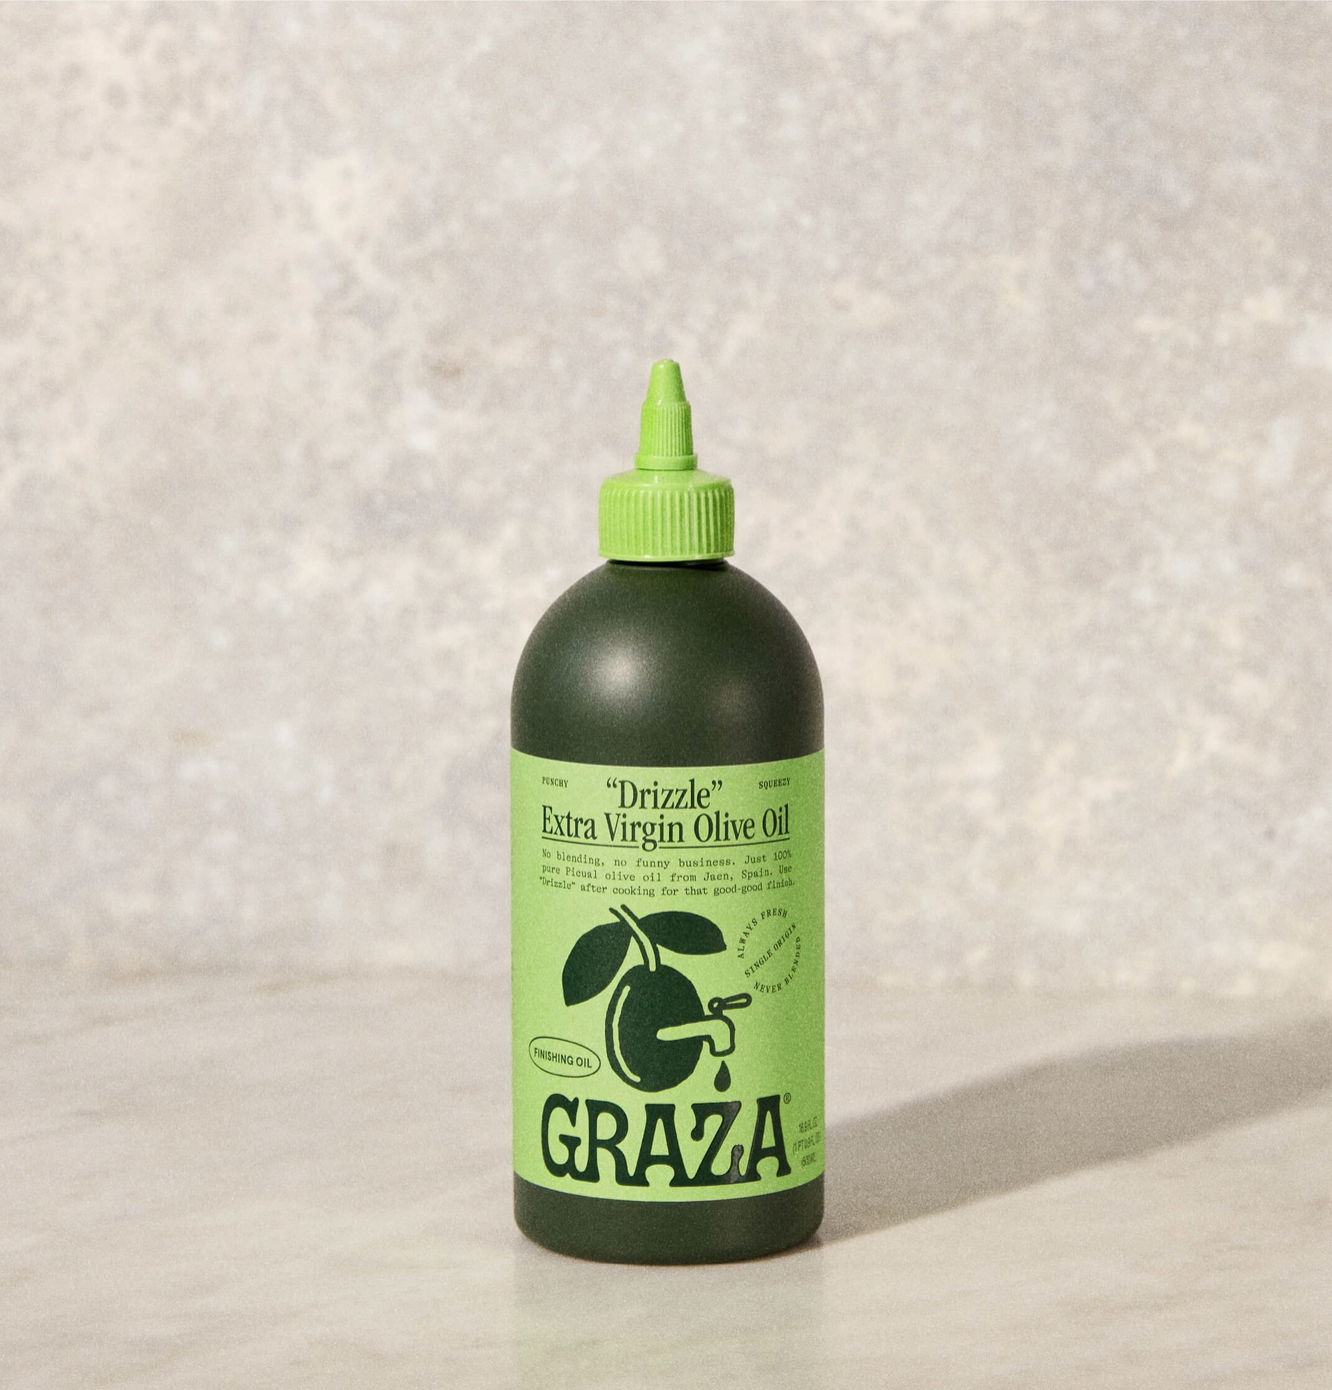 A bottle of Faire "Drizzle" extra virgin olive oil, featuring a dark matte bottle with a green cap, set against a textured gray background, ideal as a finishing oil.